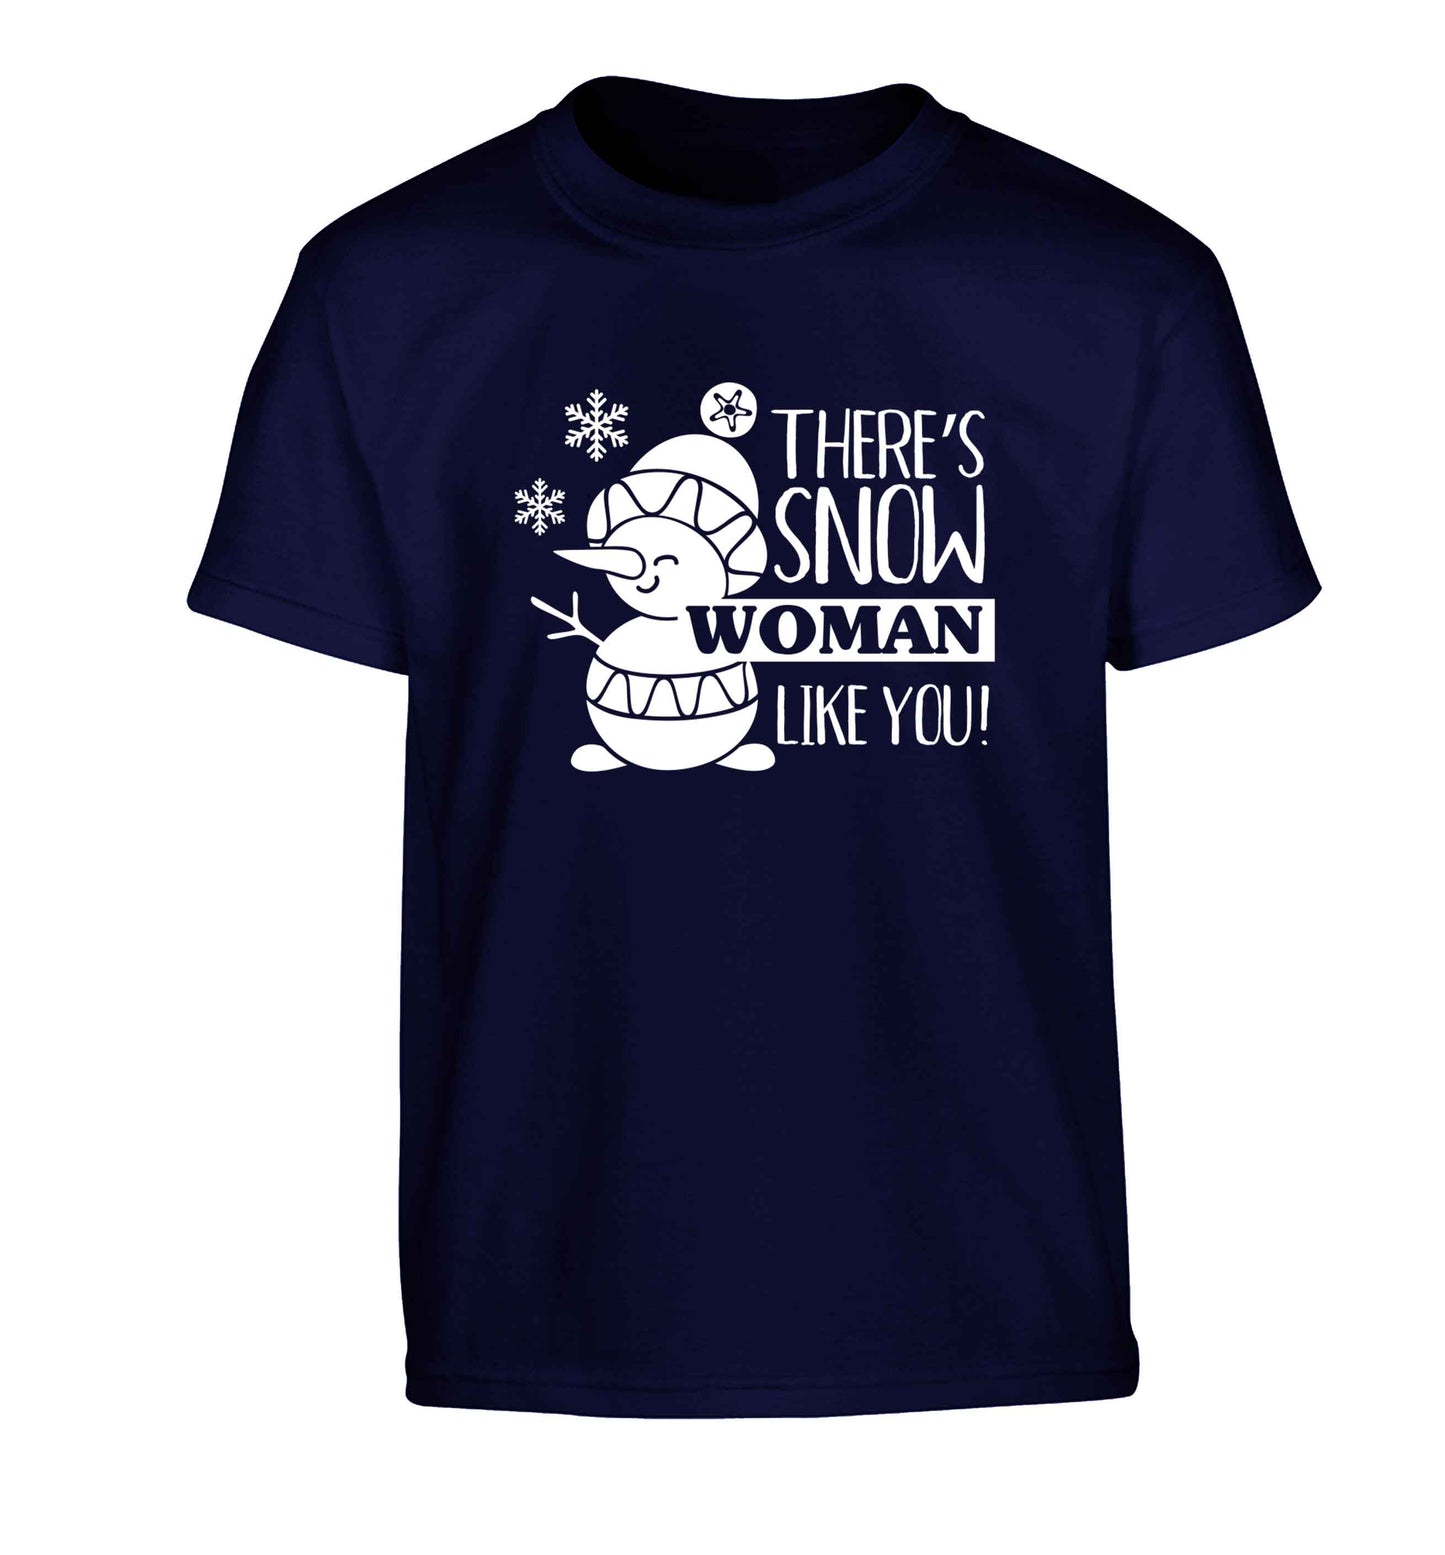 There's snow woman like you Children's navy Tshirt 12-13 Years